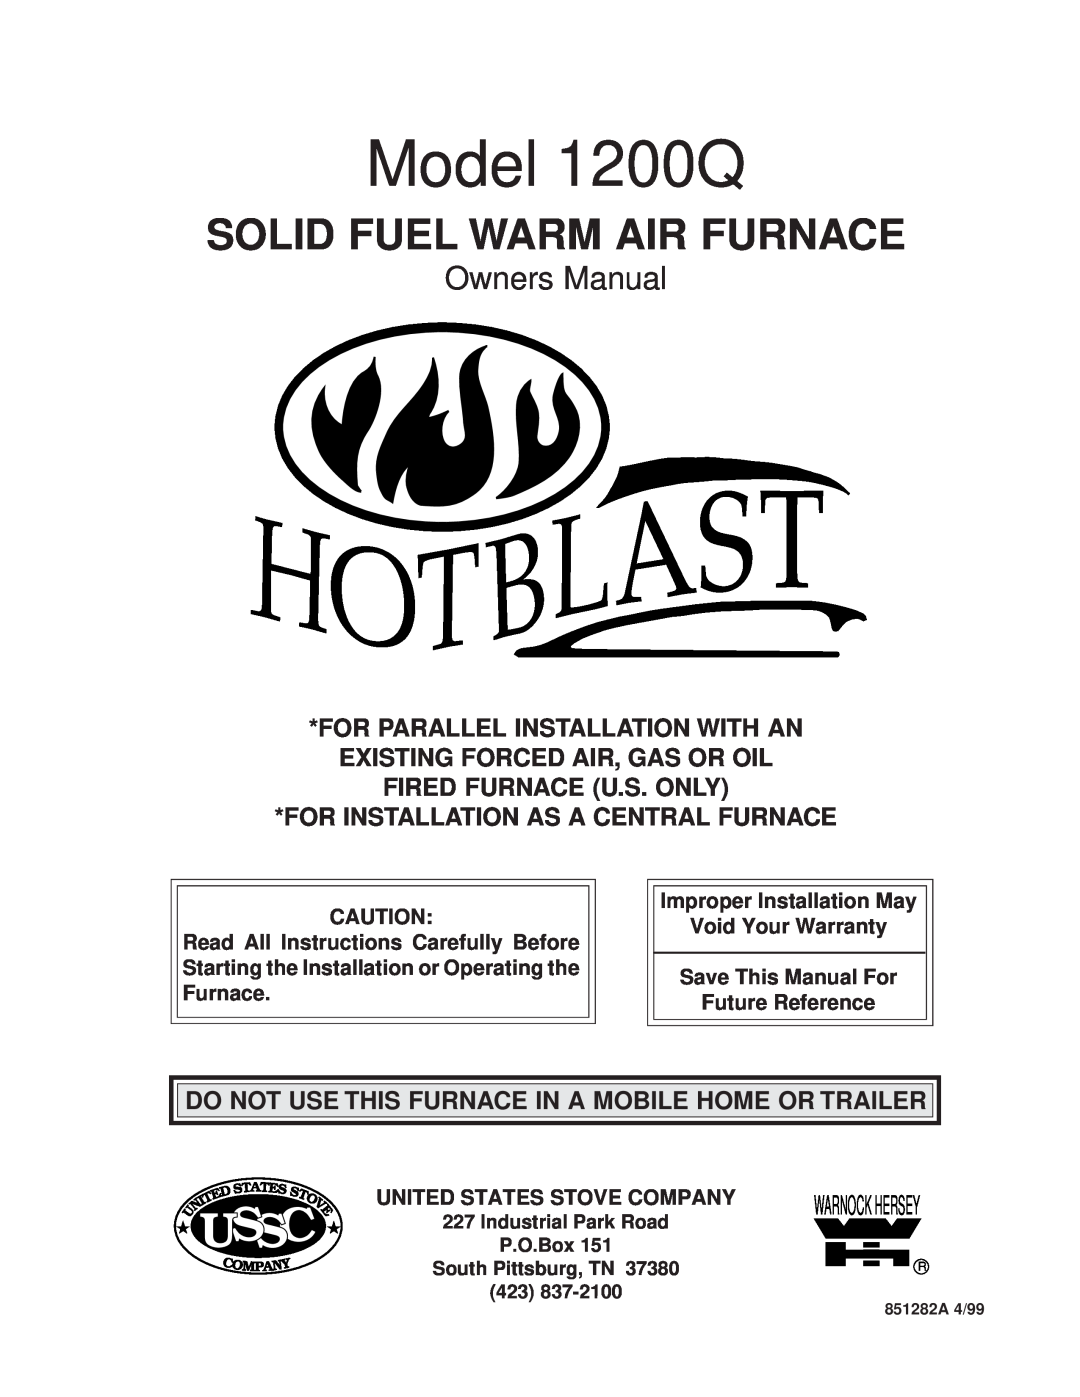 United States Stove 1200Q owner manual Owners Manual, For Parallel Installation With An, Existing Forced Air, Gas Or Oil 